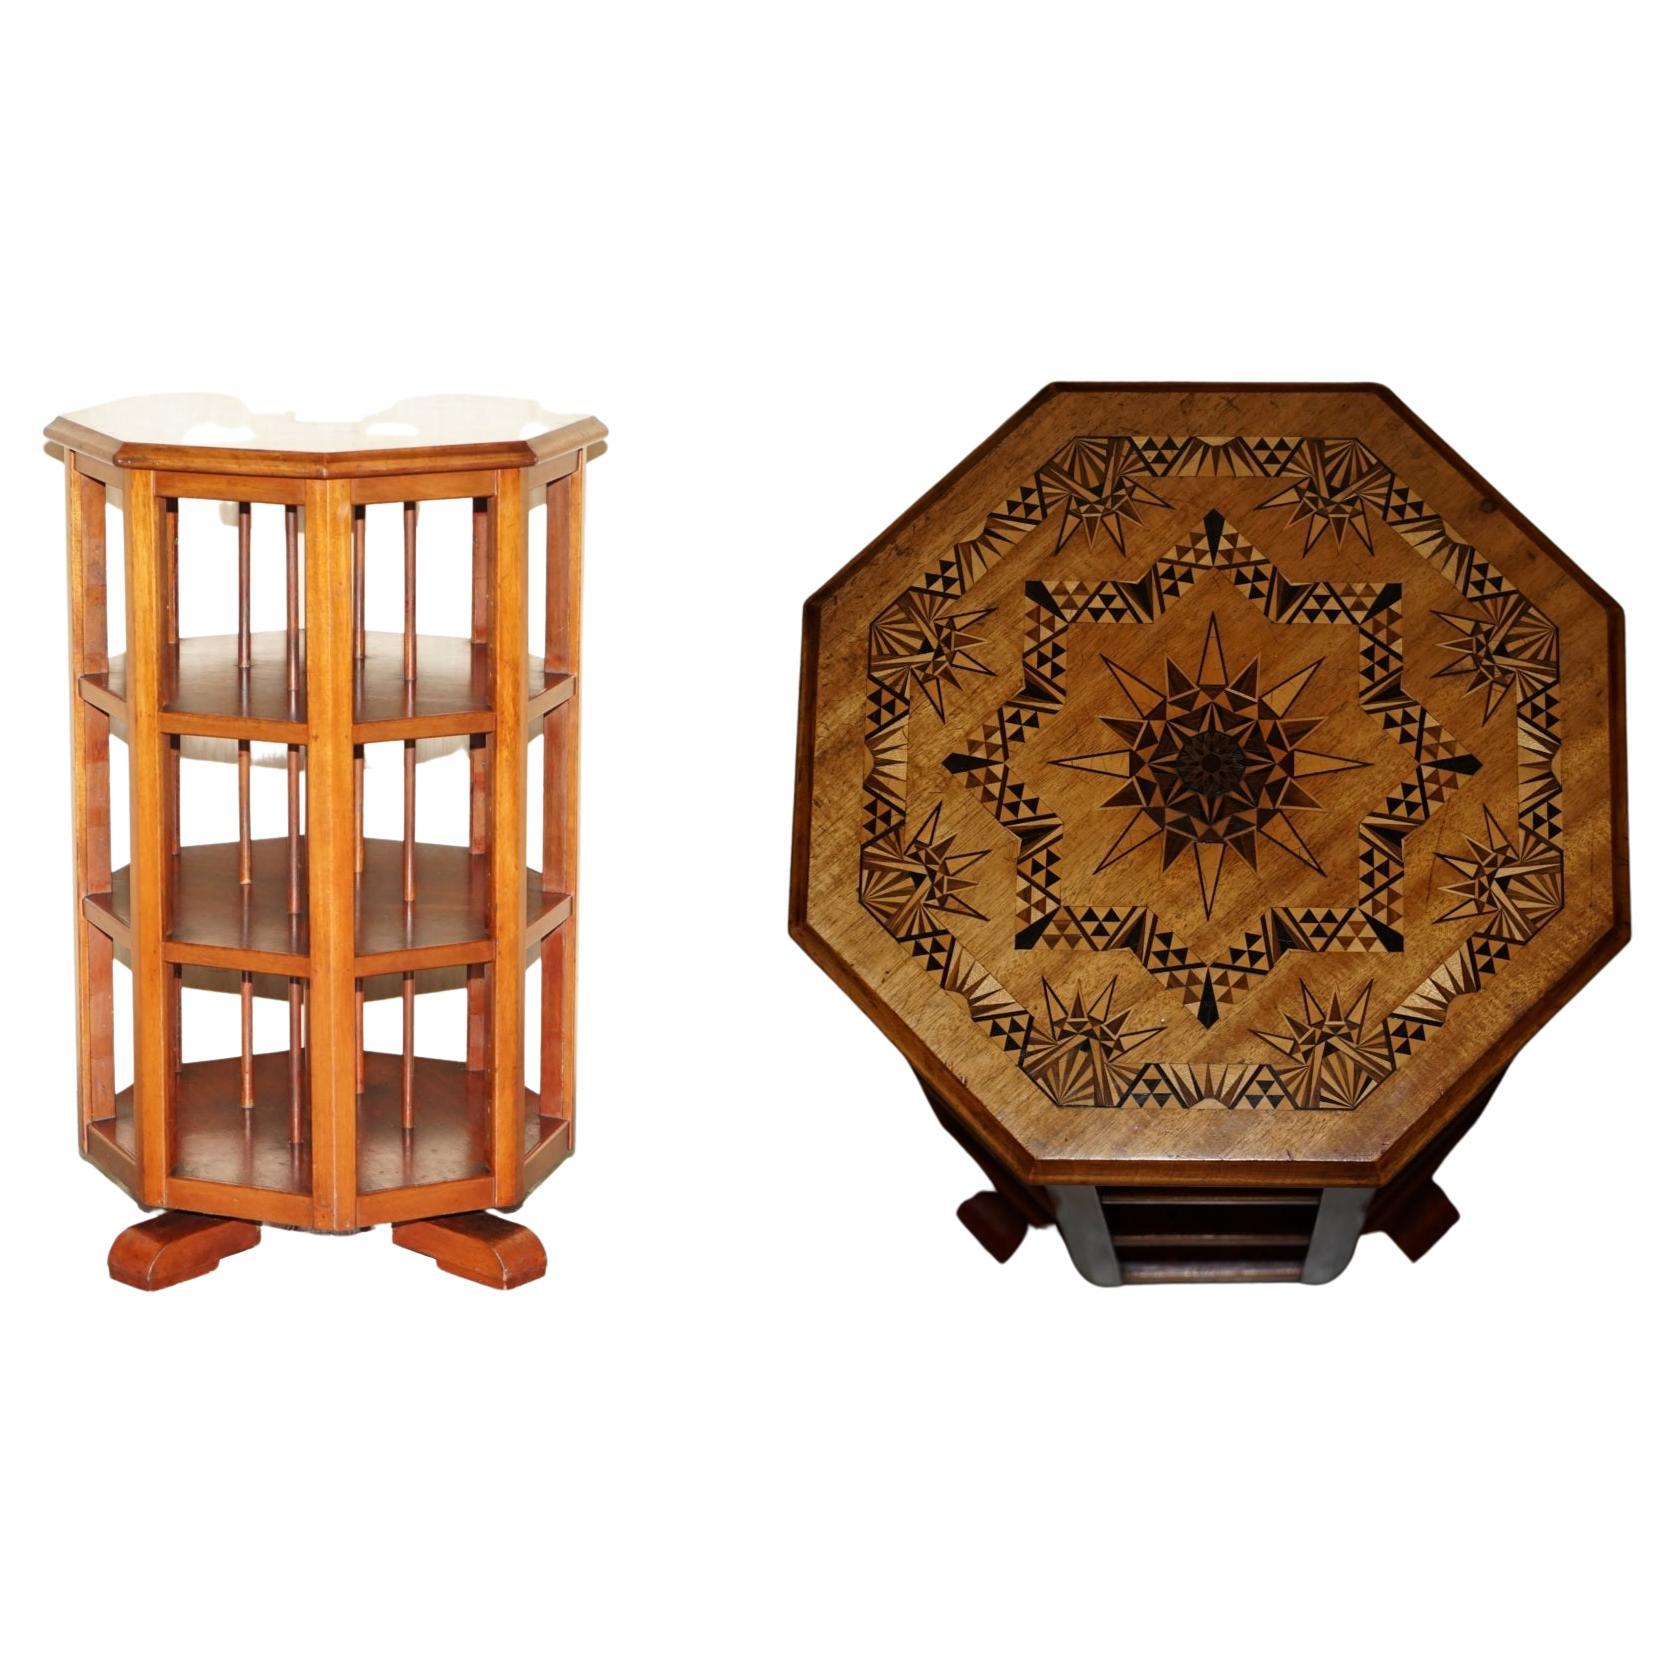 Stunning Beautifully Inlaid Octagonal Revolving Bookcase Book Table Must See Pic For Sale